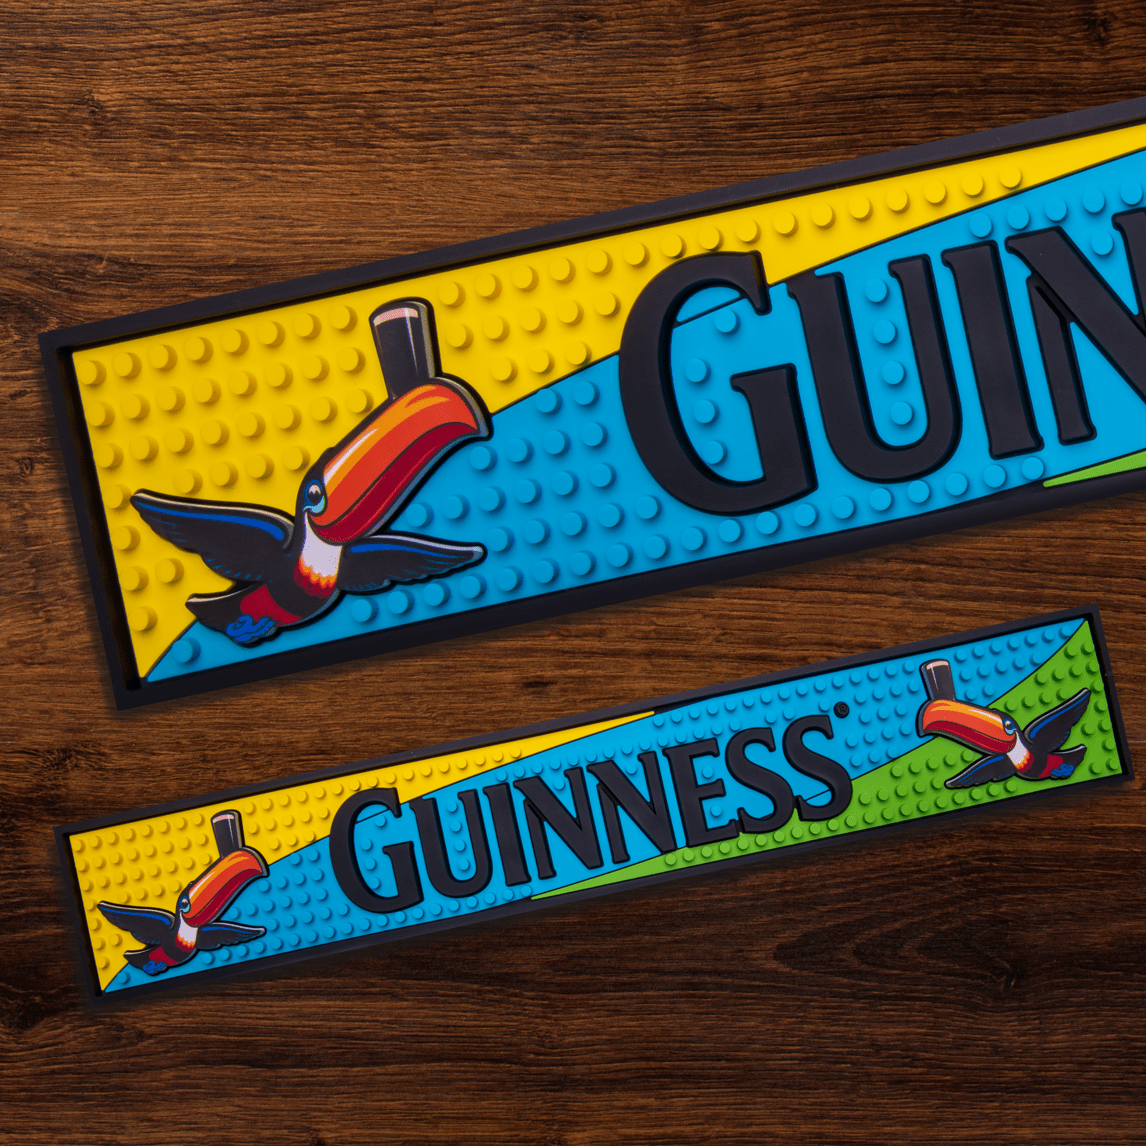 Guinness Ultimate Toucan Home Bar Pack coasters are the perfect bar gift.